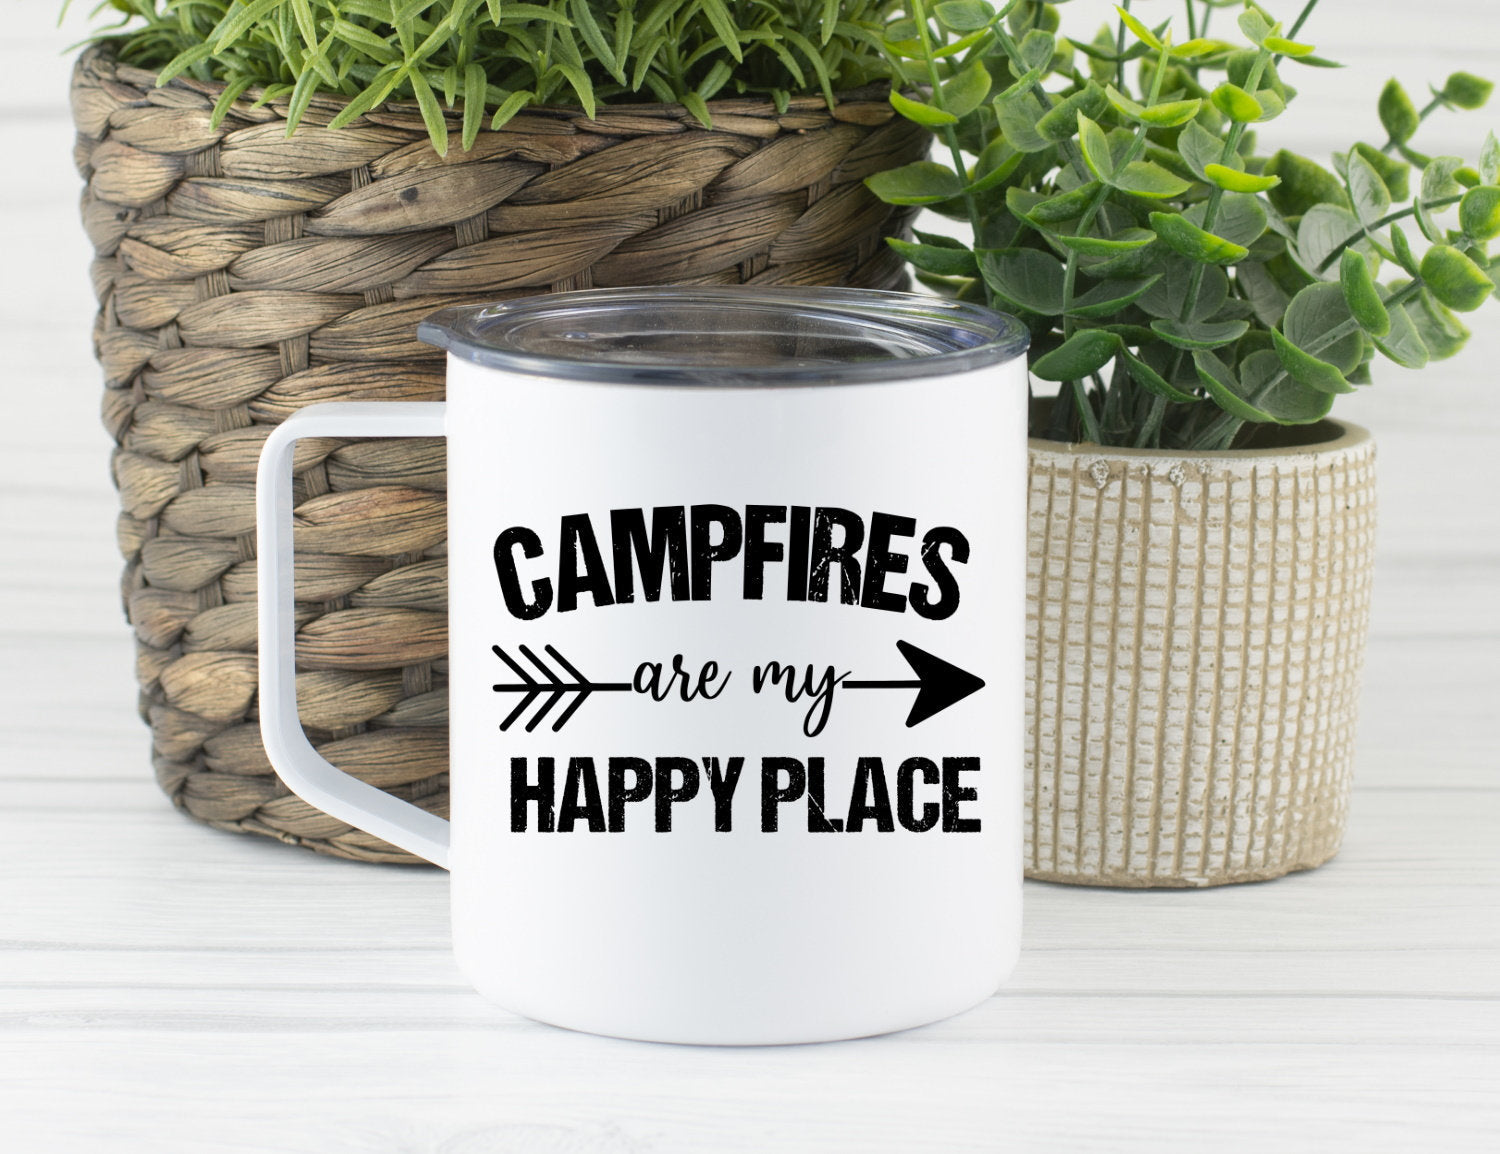 Campfires Are My Happy Place Travel Mug, Camping Mug, Camper Travel Cup, Coffee Stainless Steel Mug